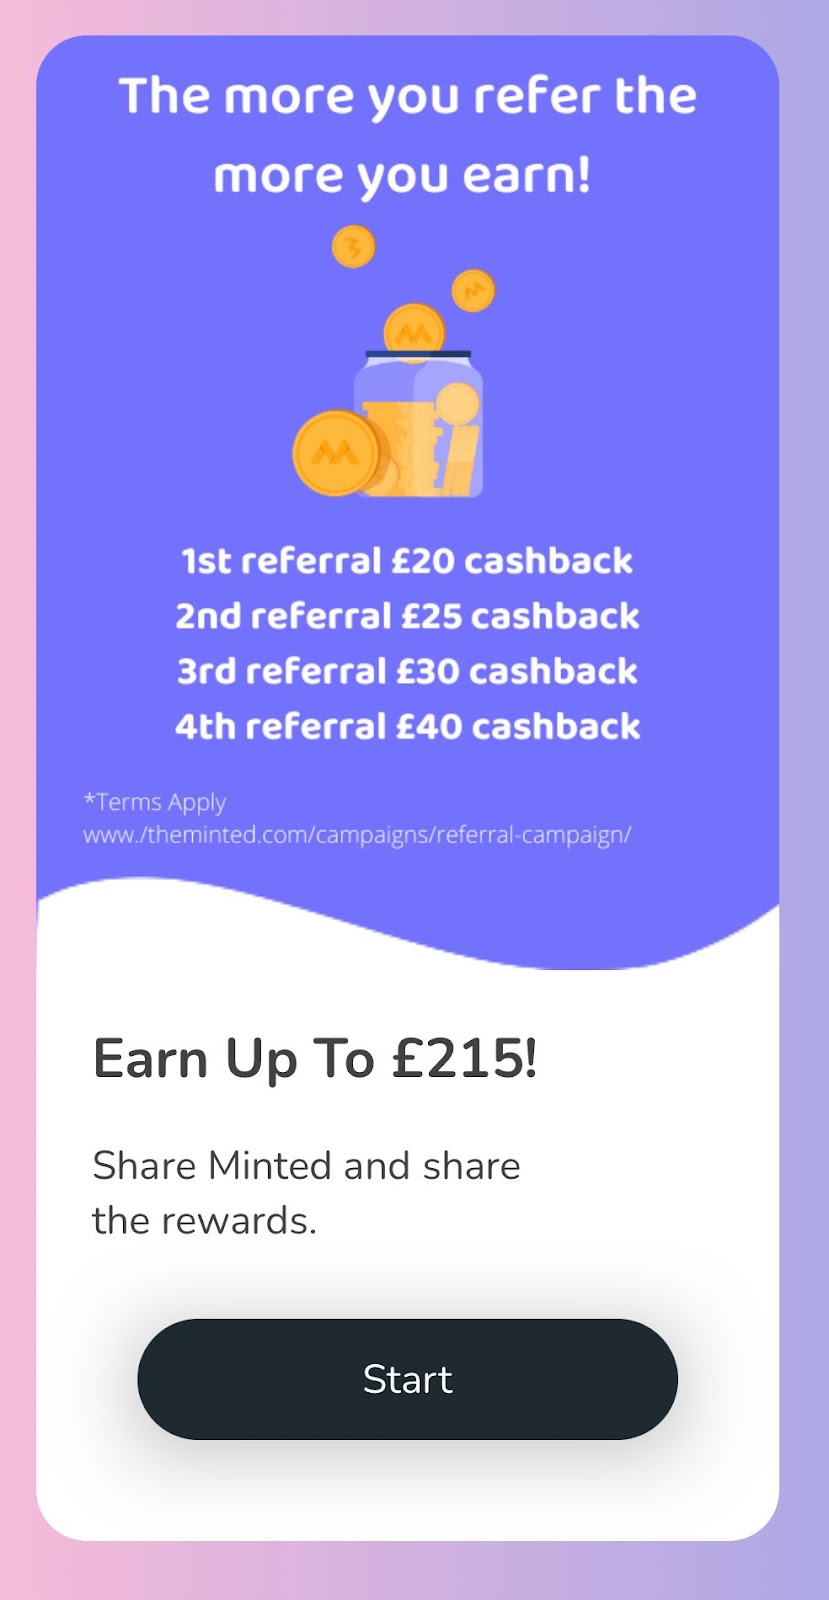 Minted gold app referral campaign